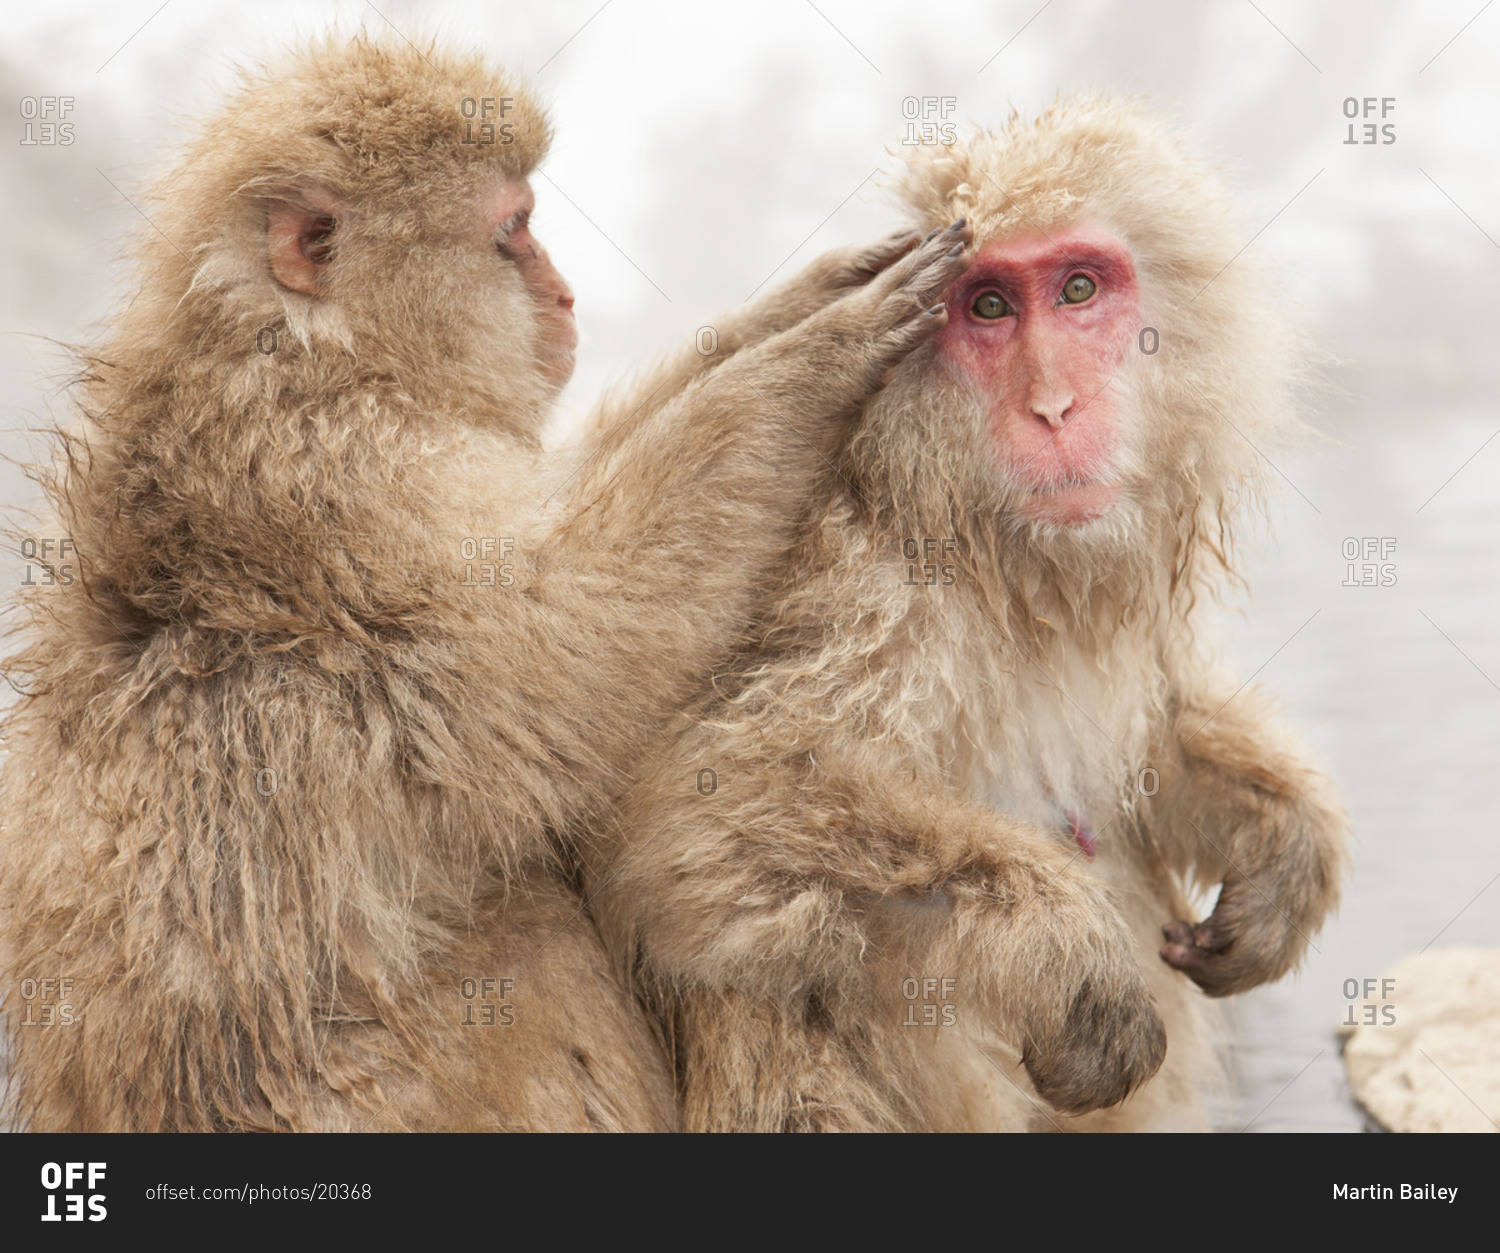 Japanese macaque grooming each other in Jigokudani Monkey Park, Nagano Prefecture, Japan.